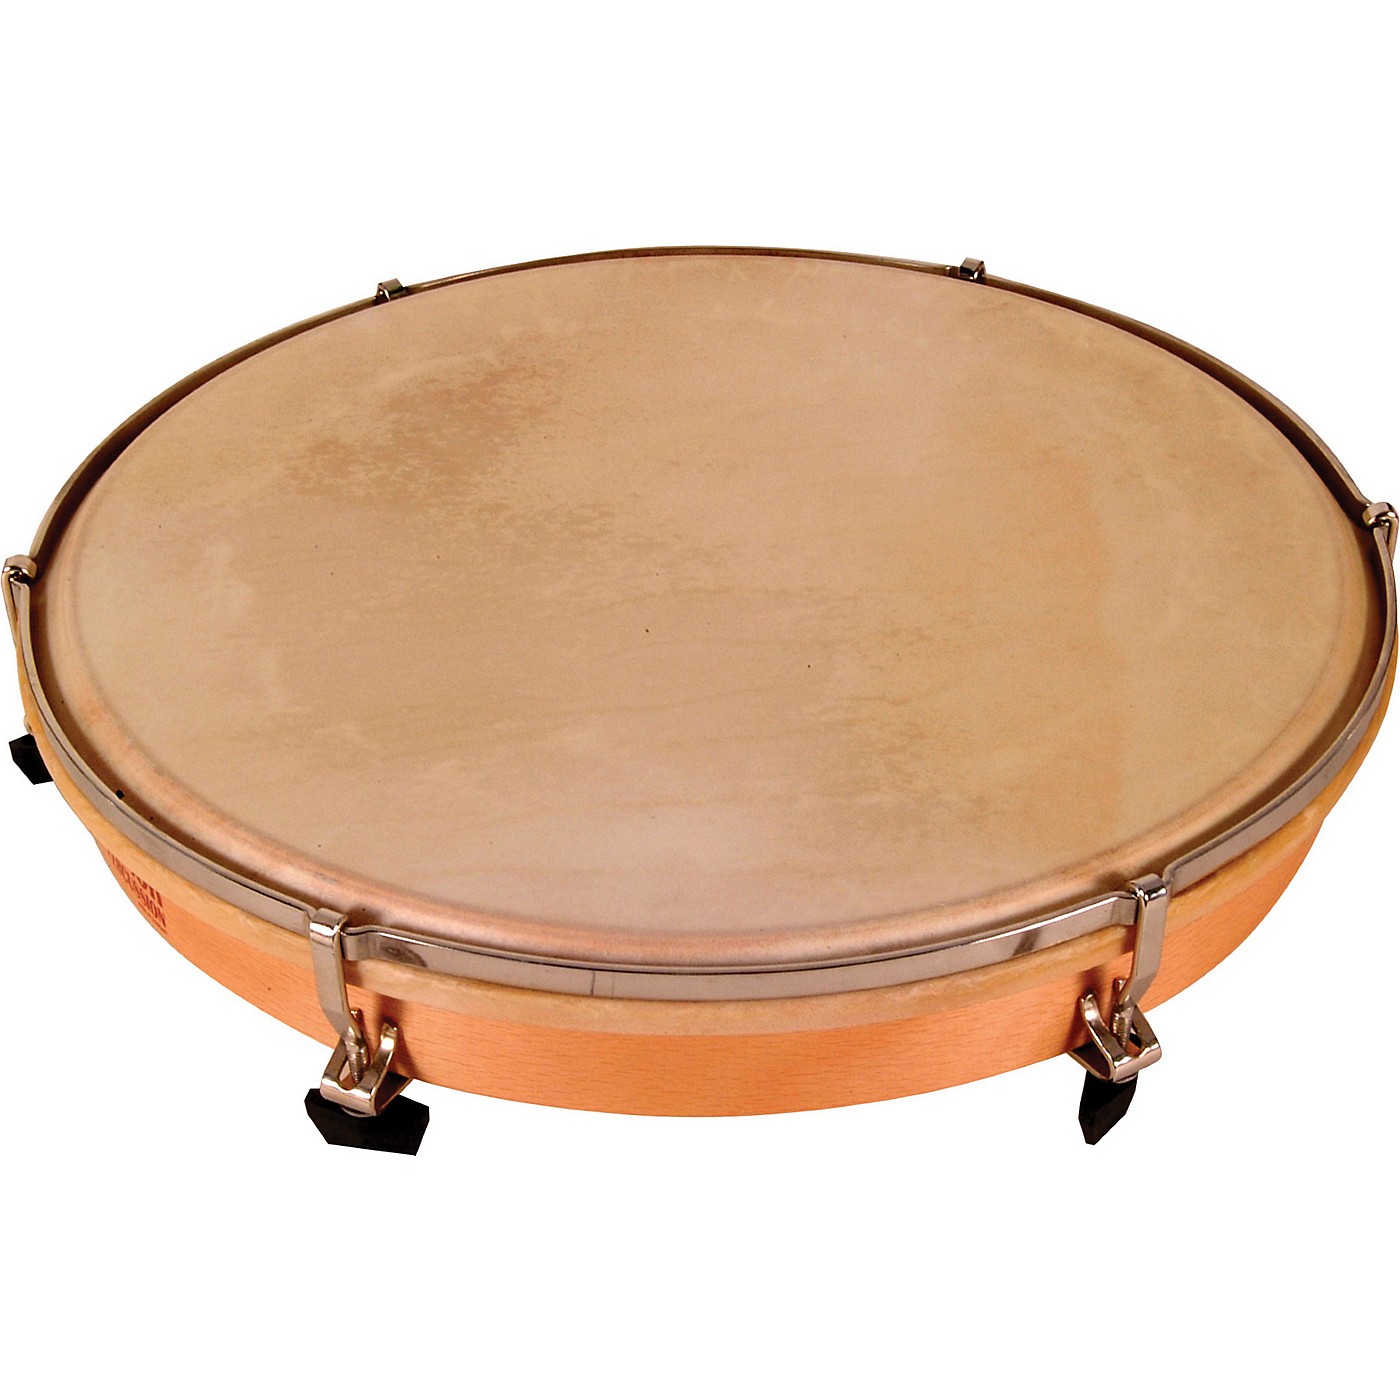 Primary Sonor Hand Drums thumbnail